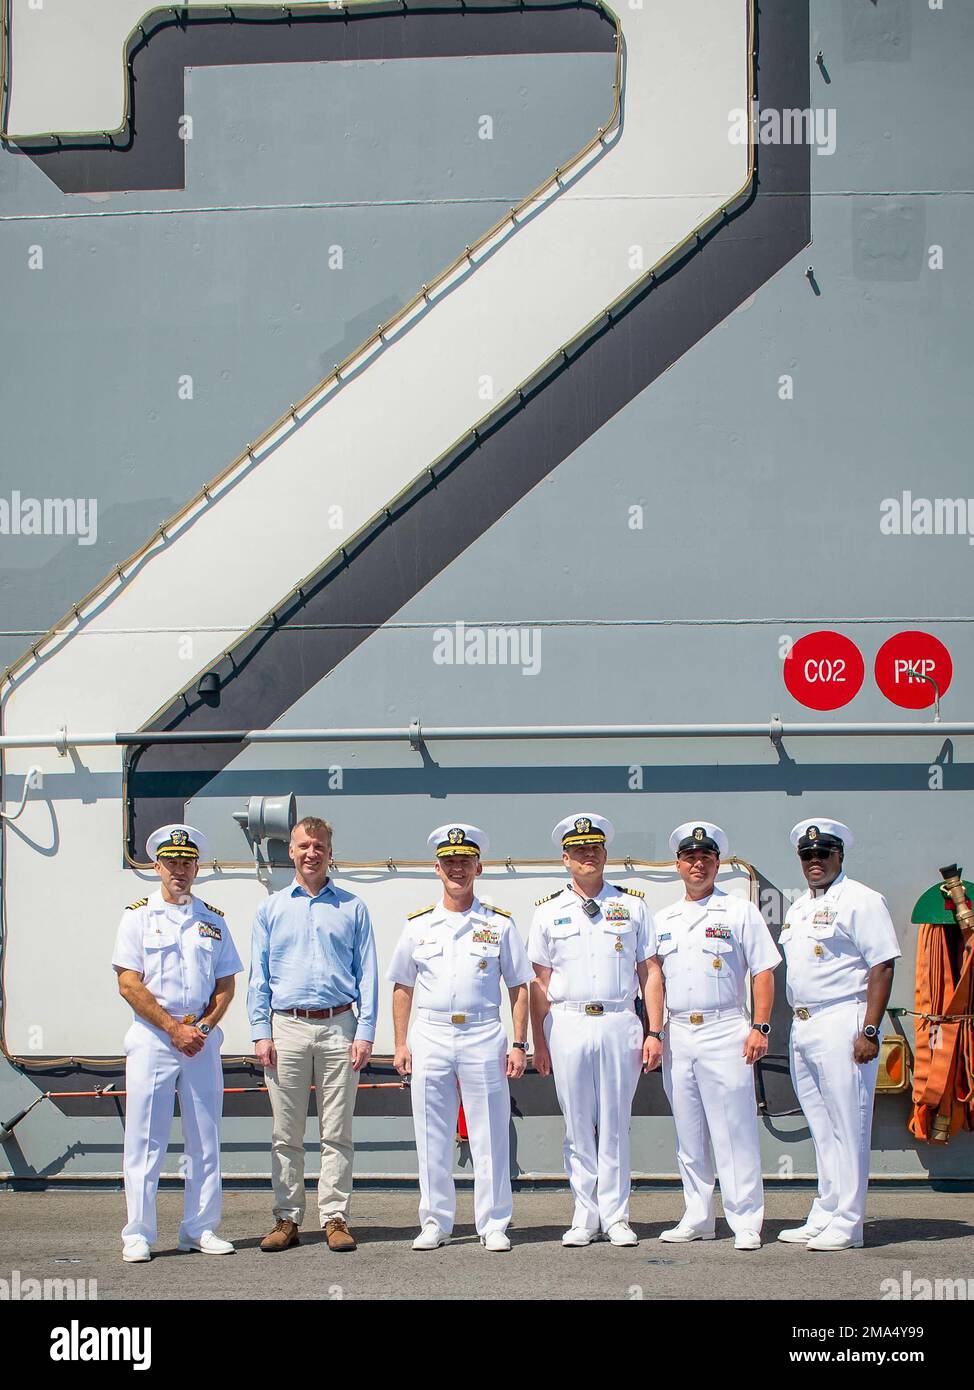 LOS ANGELES (May 24, 2022) Under Secretary of the Navy Erik K. Raven, 2nd from the left, takes a group photo with Capt. Aaron Taylor, left, commanding officer of amphibious assault ship USS Essex (LHD 2), Rear Adm. Michael Baze, left center, commander, Expeditionary Strike Group Three, Capt. Wayne Liebold, right center, executive officer of Essex, Command Master Chief Jason Ortega, 2nd from the right, and Command Master Chief Jasen Williams, right, during Los Angeles Fleet Week, May 24, 2022. Los Angeles Fleet Week is an opportunity for the American public to meet their Navy, Marine Corps and Stock Photo